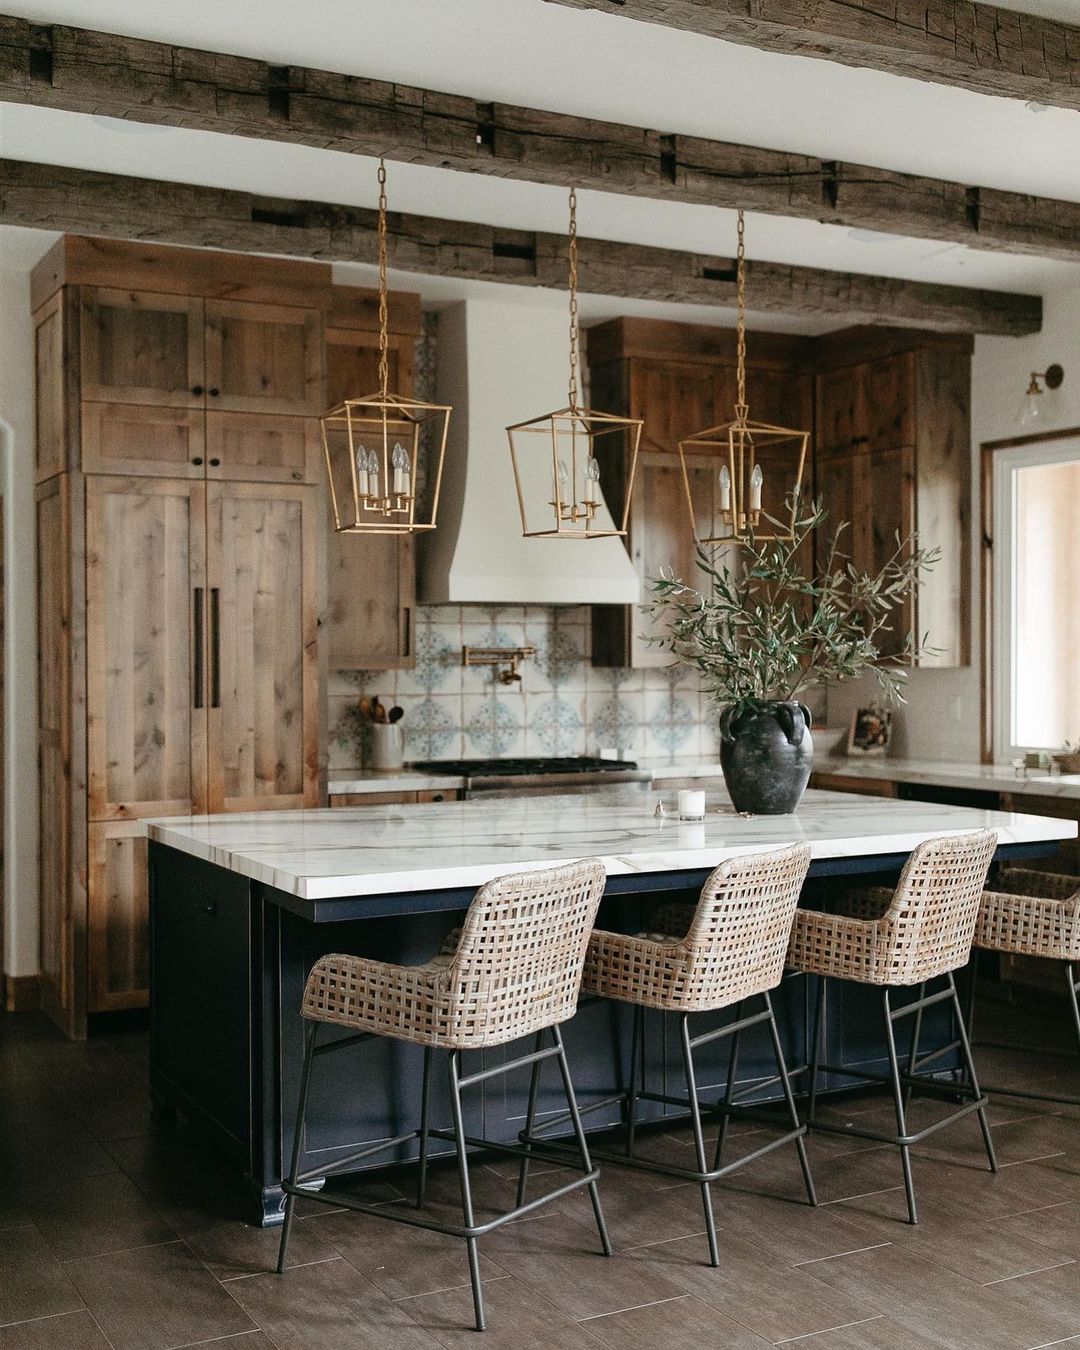 Feng Shui wood element interior design featuring a modern kitchen with a large island and brown cabinets. Photo by instagram user @graceddesigns